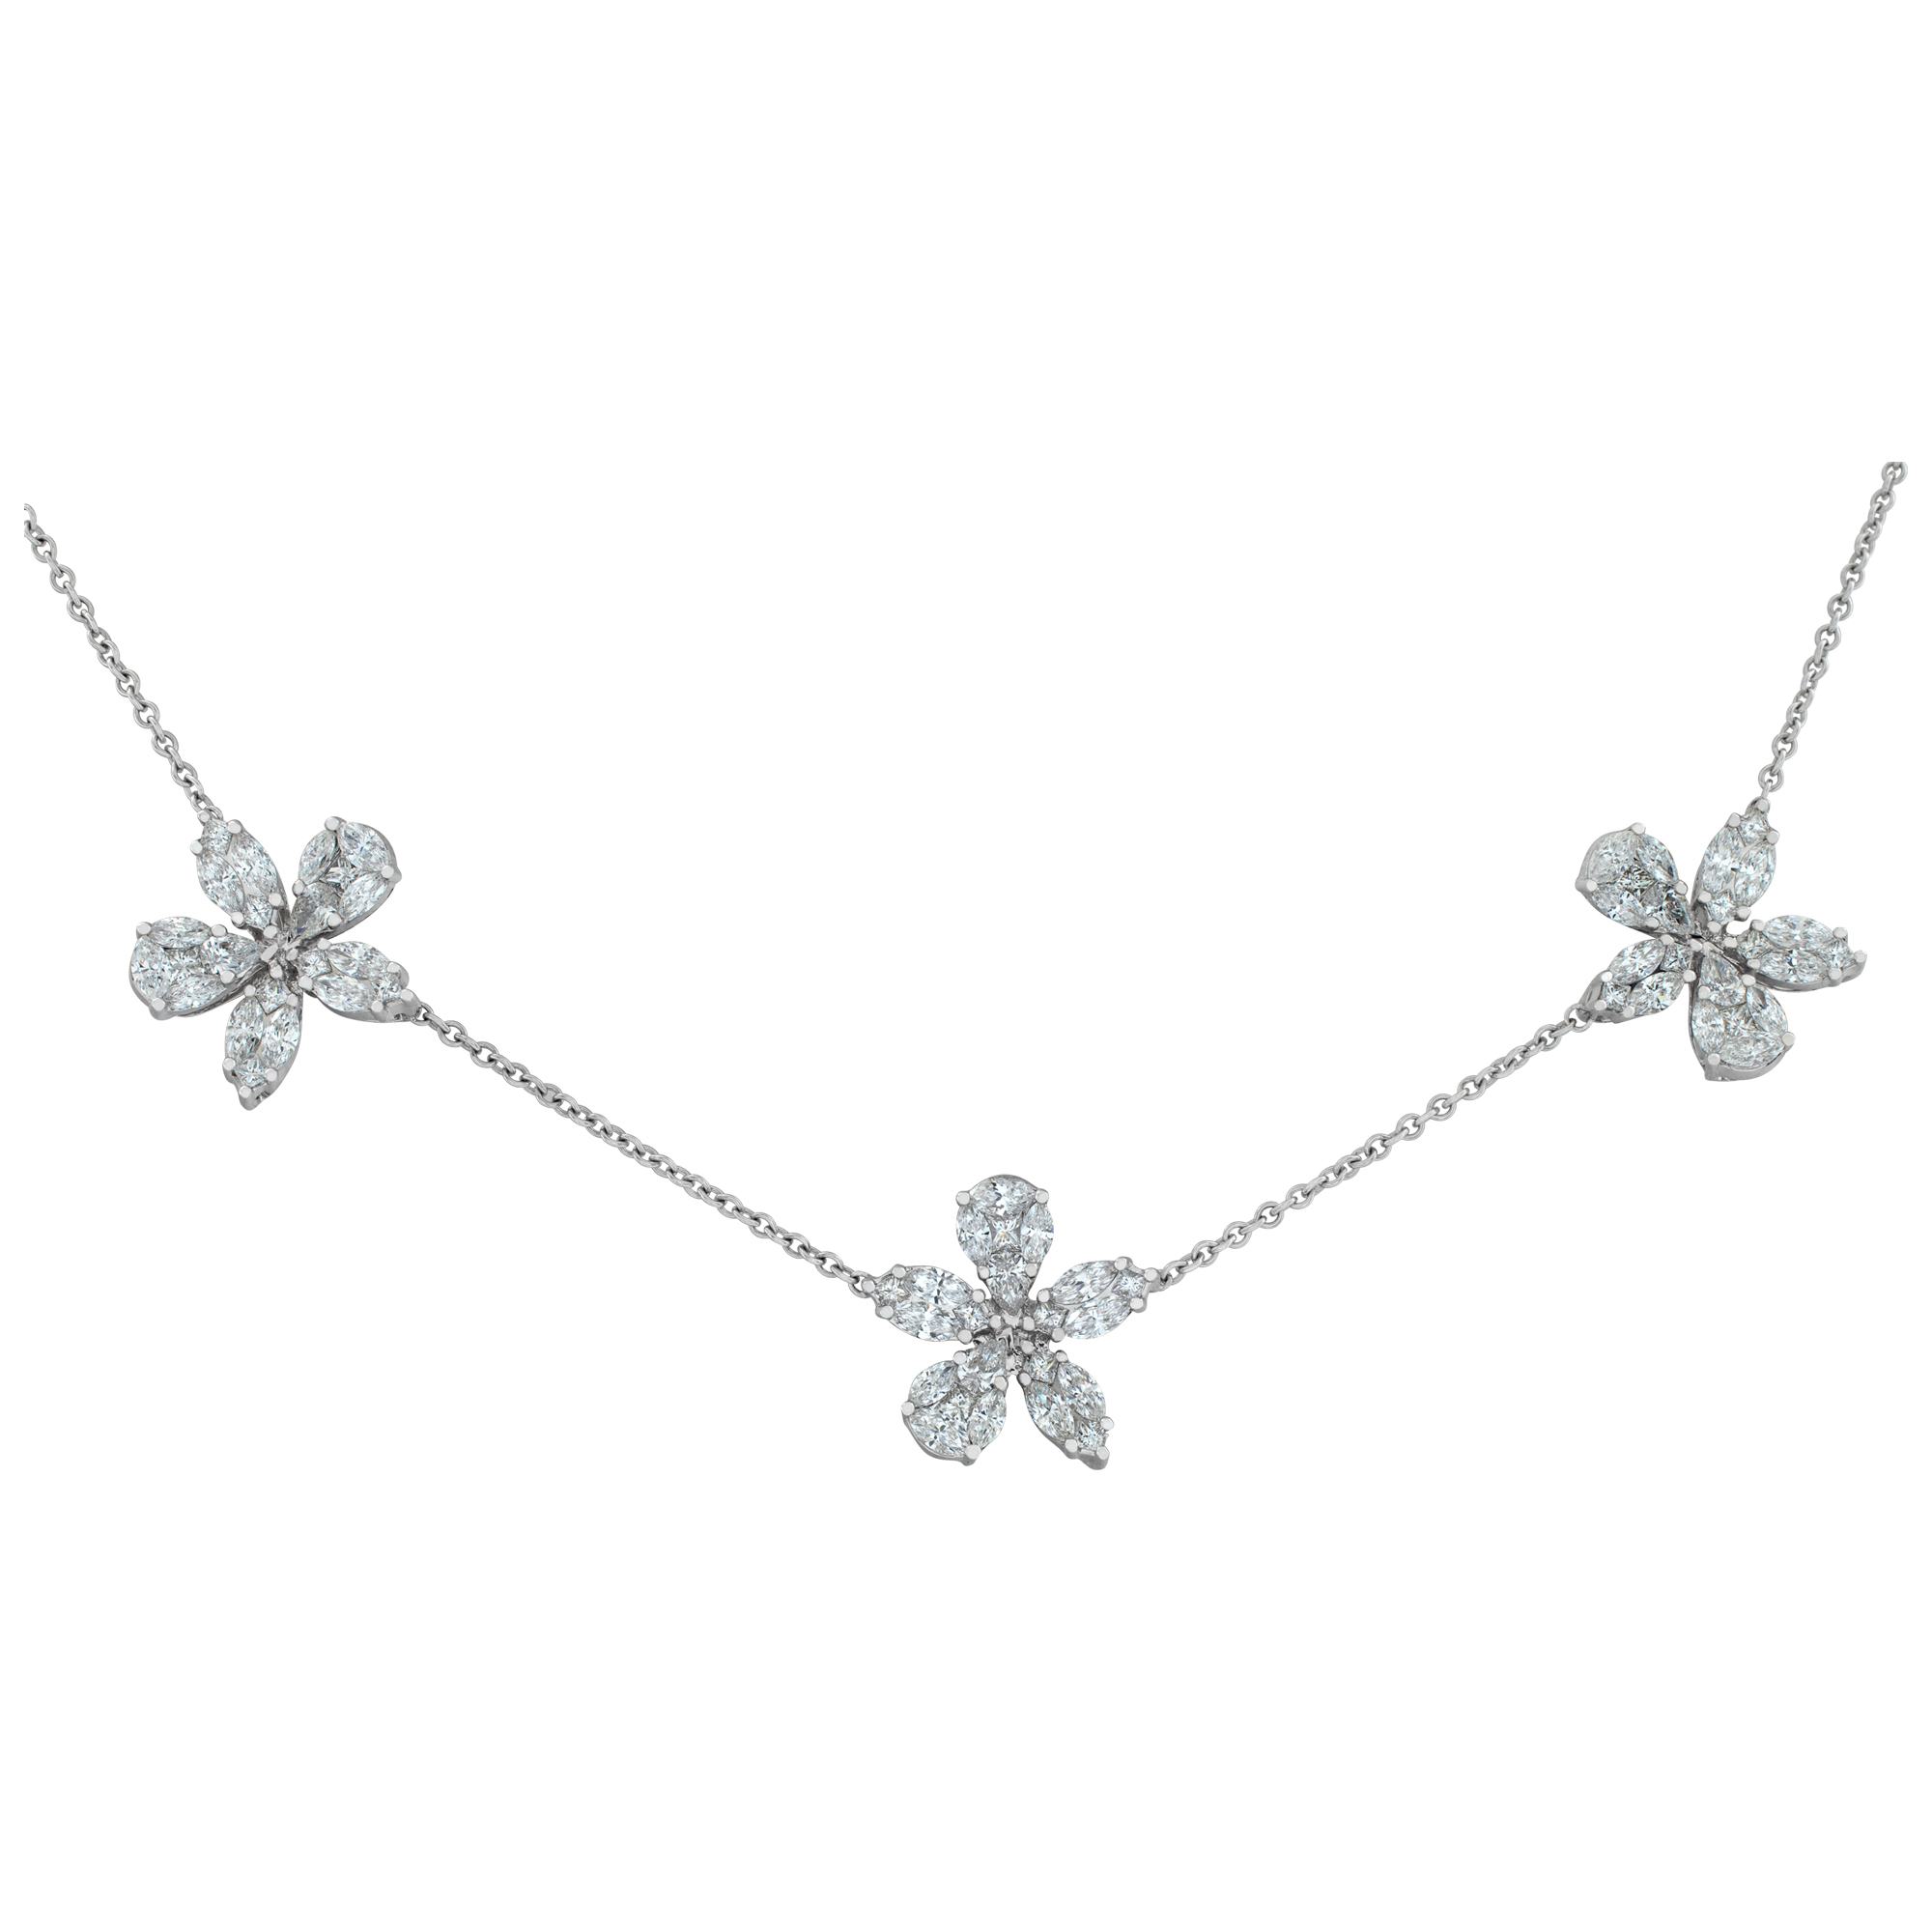 Illusion set diamond flower necklace with 6.00 carats in diamonds. 18k inch length. image 1